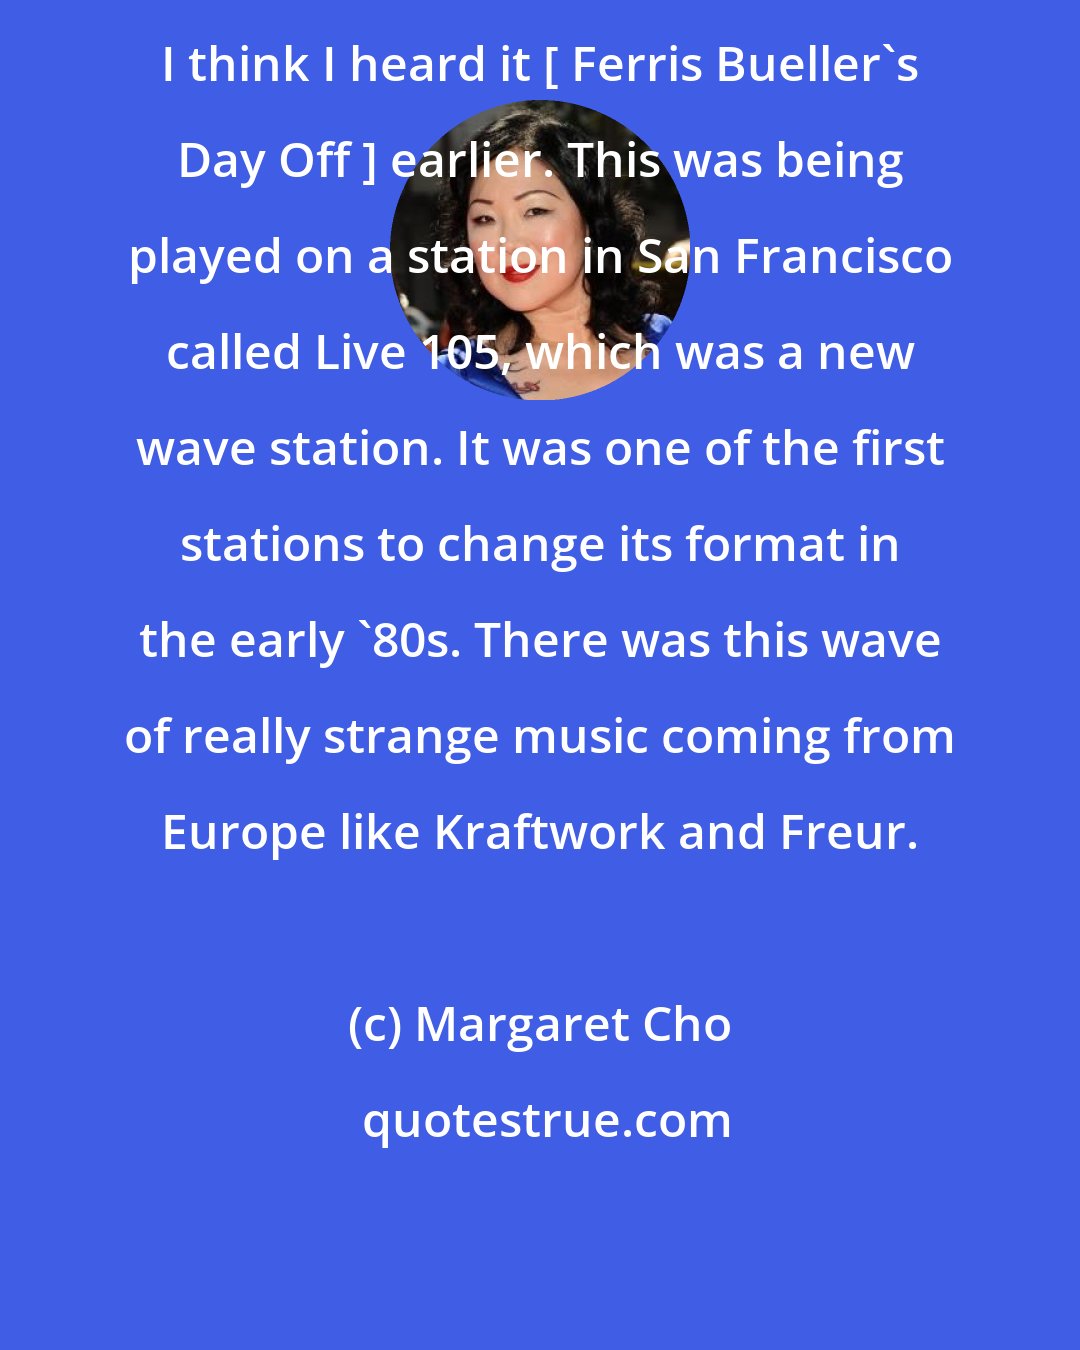 Margaret Cho: I think I heard it [ Ferris Bueller's Day Off ] earlier. This was being played on a station in San Francisco called Live 105, which was a new wave station. It was one of the first stations to change its format in the early '80s. There was this wave of really strange music coming from Europe like Kraftwork and Freur.